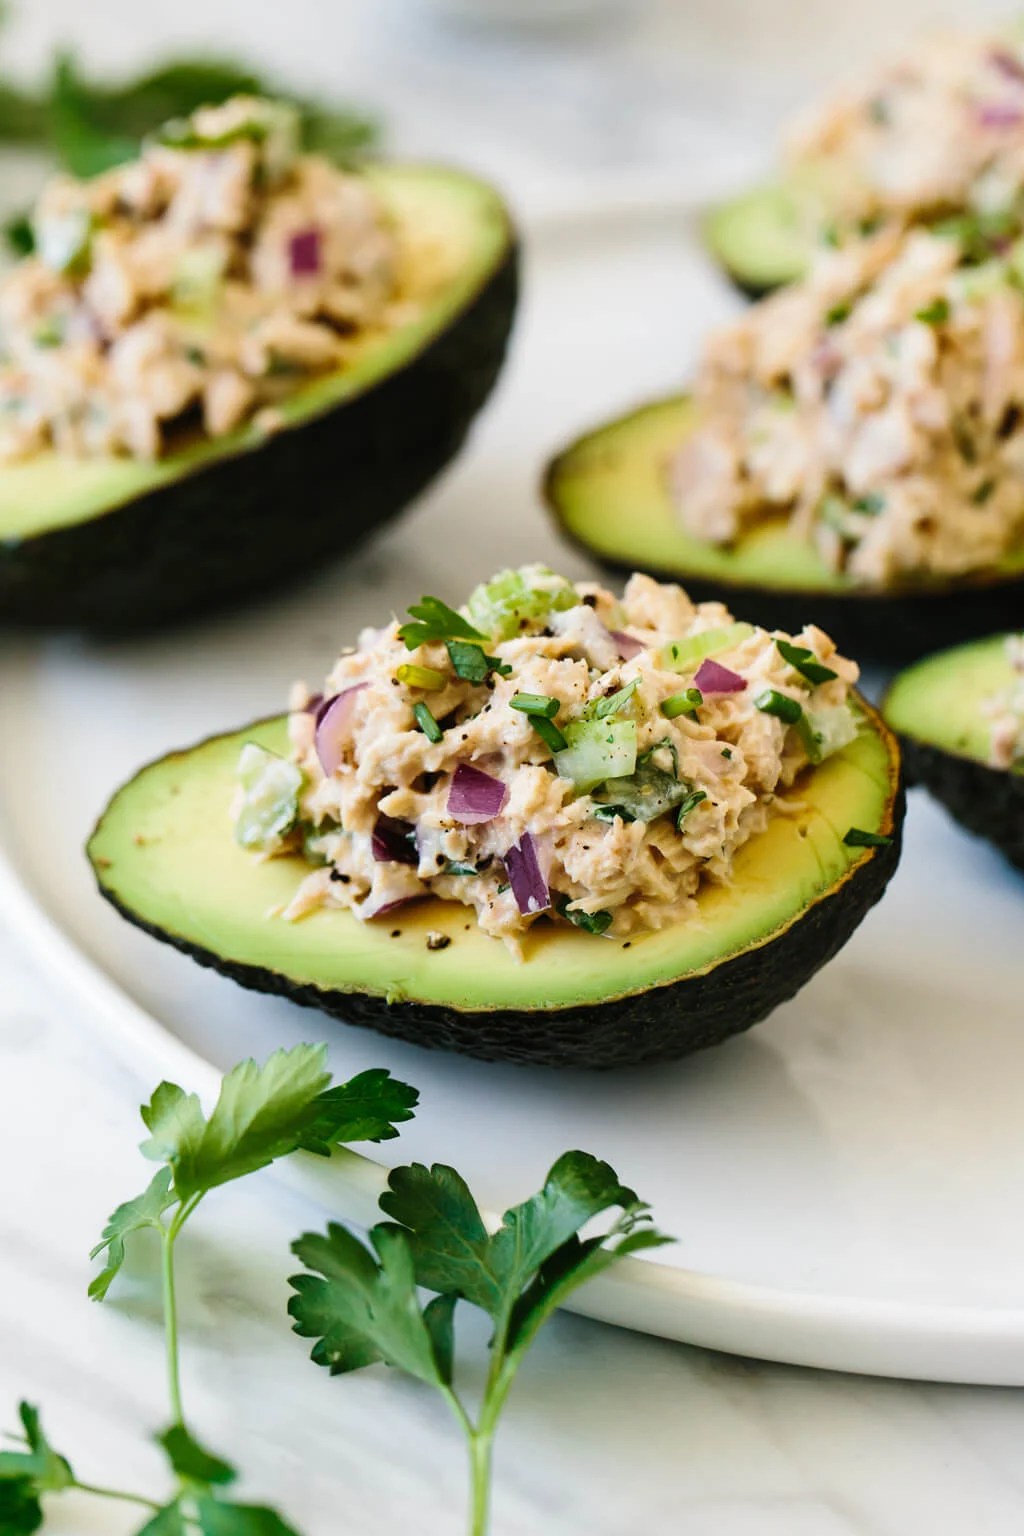 Tuna stuffed avocados are a delicious low-carb, keto, Whole30 and paleo-friendly lunch or snack recipe. A simple combination of tuna salad and avocados makes for a healthy lunch recipe.